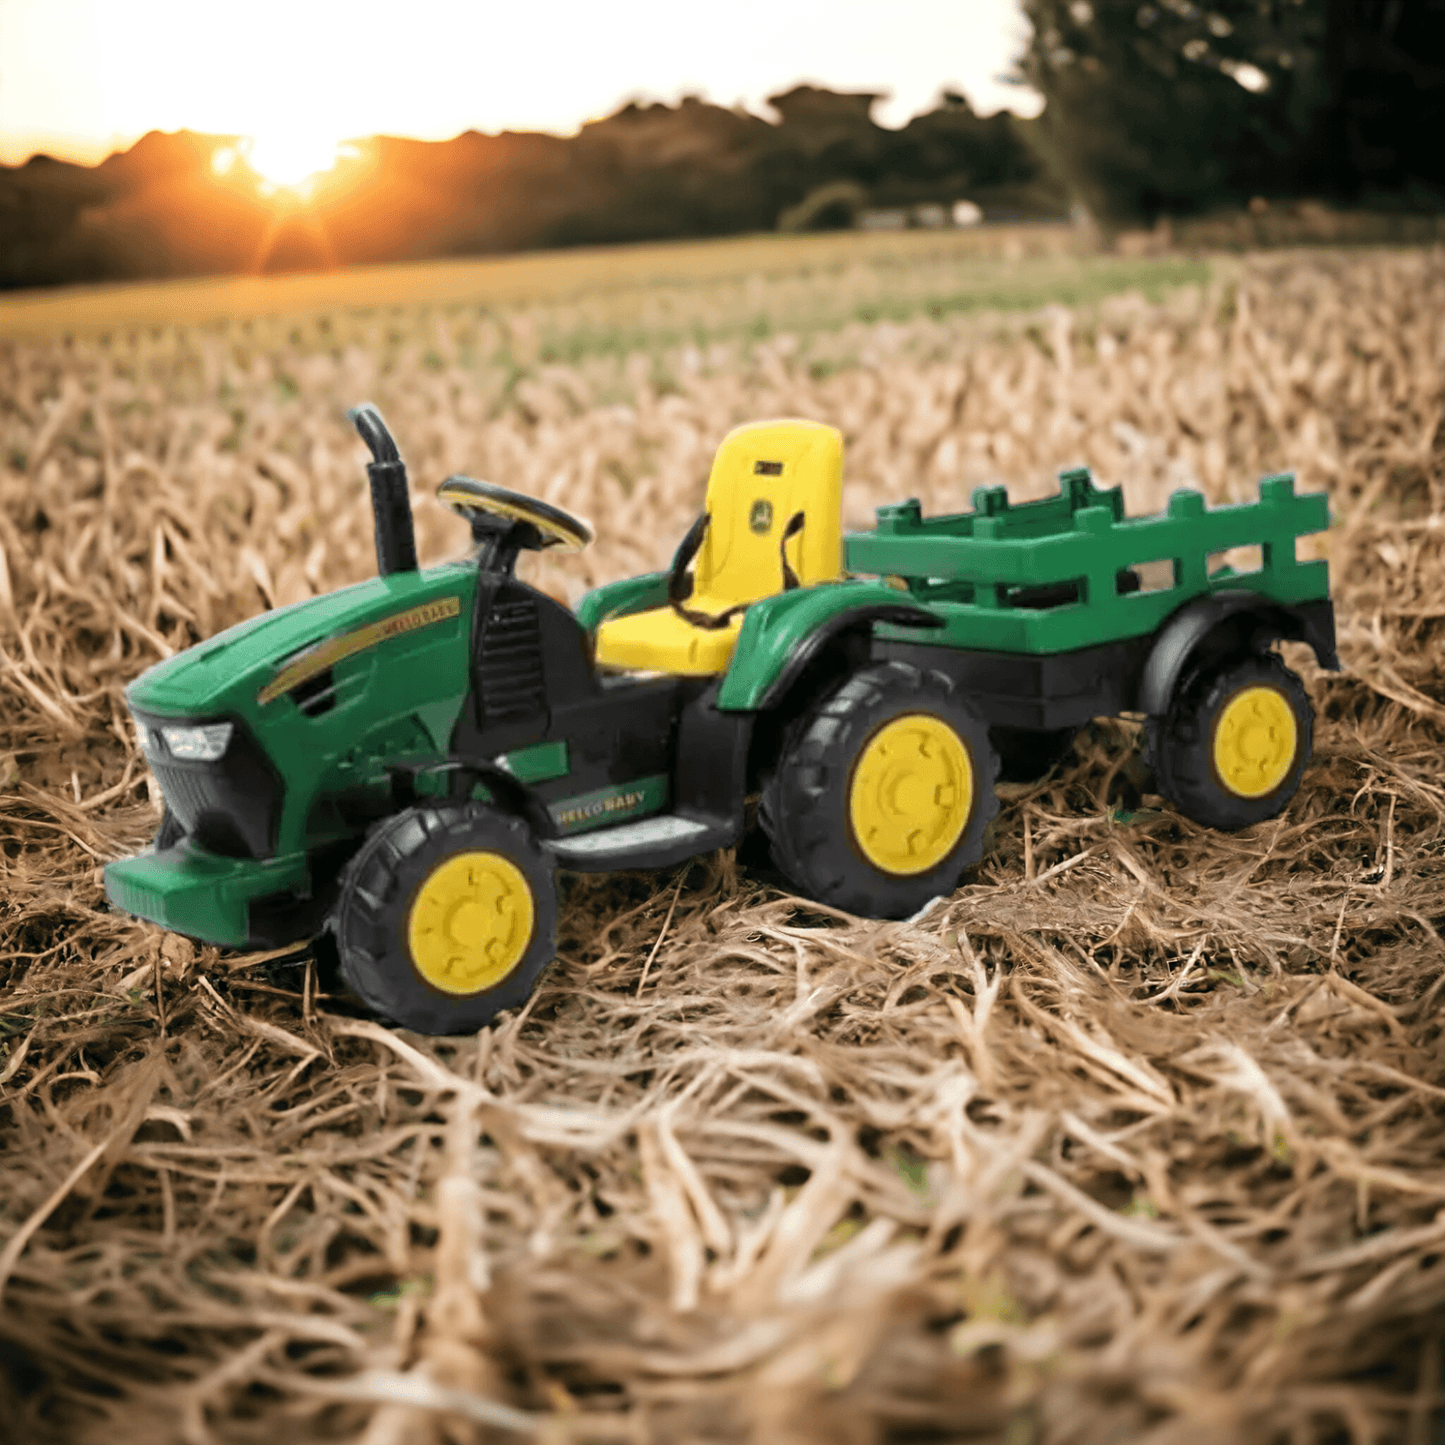 PATOYS | JOHNNY DEE Ride-On Tractor With Wagon Ground Force, 12-Volt Green Construction Vehicles PATOYS